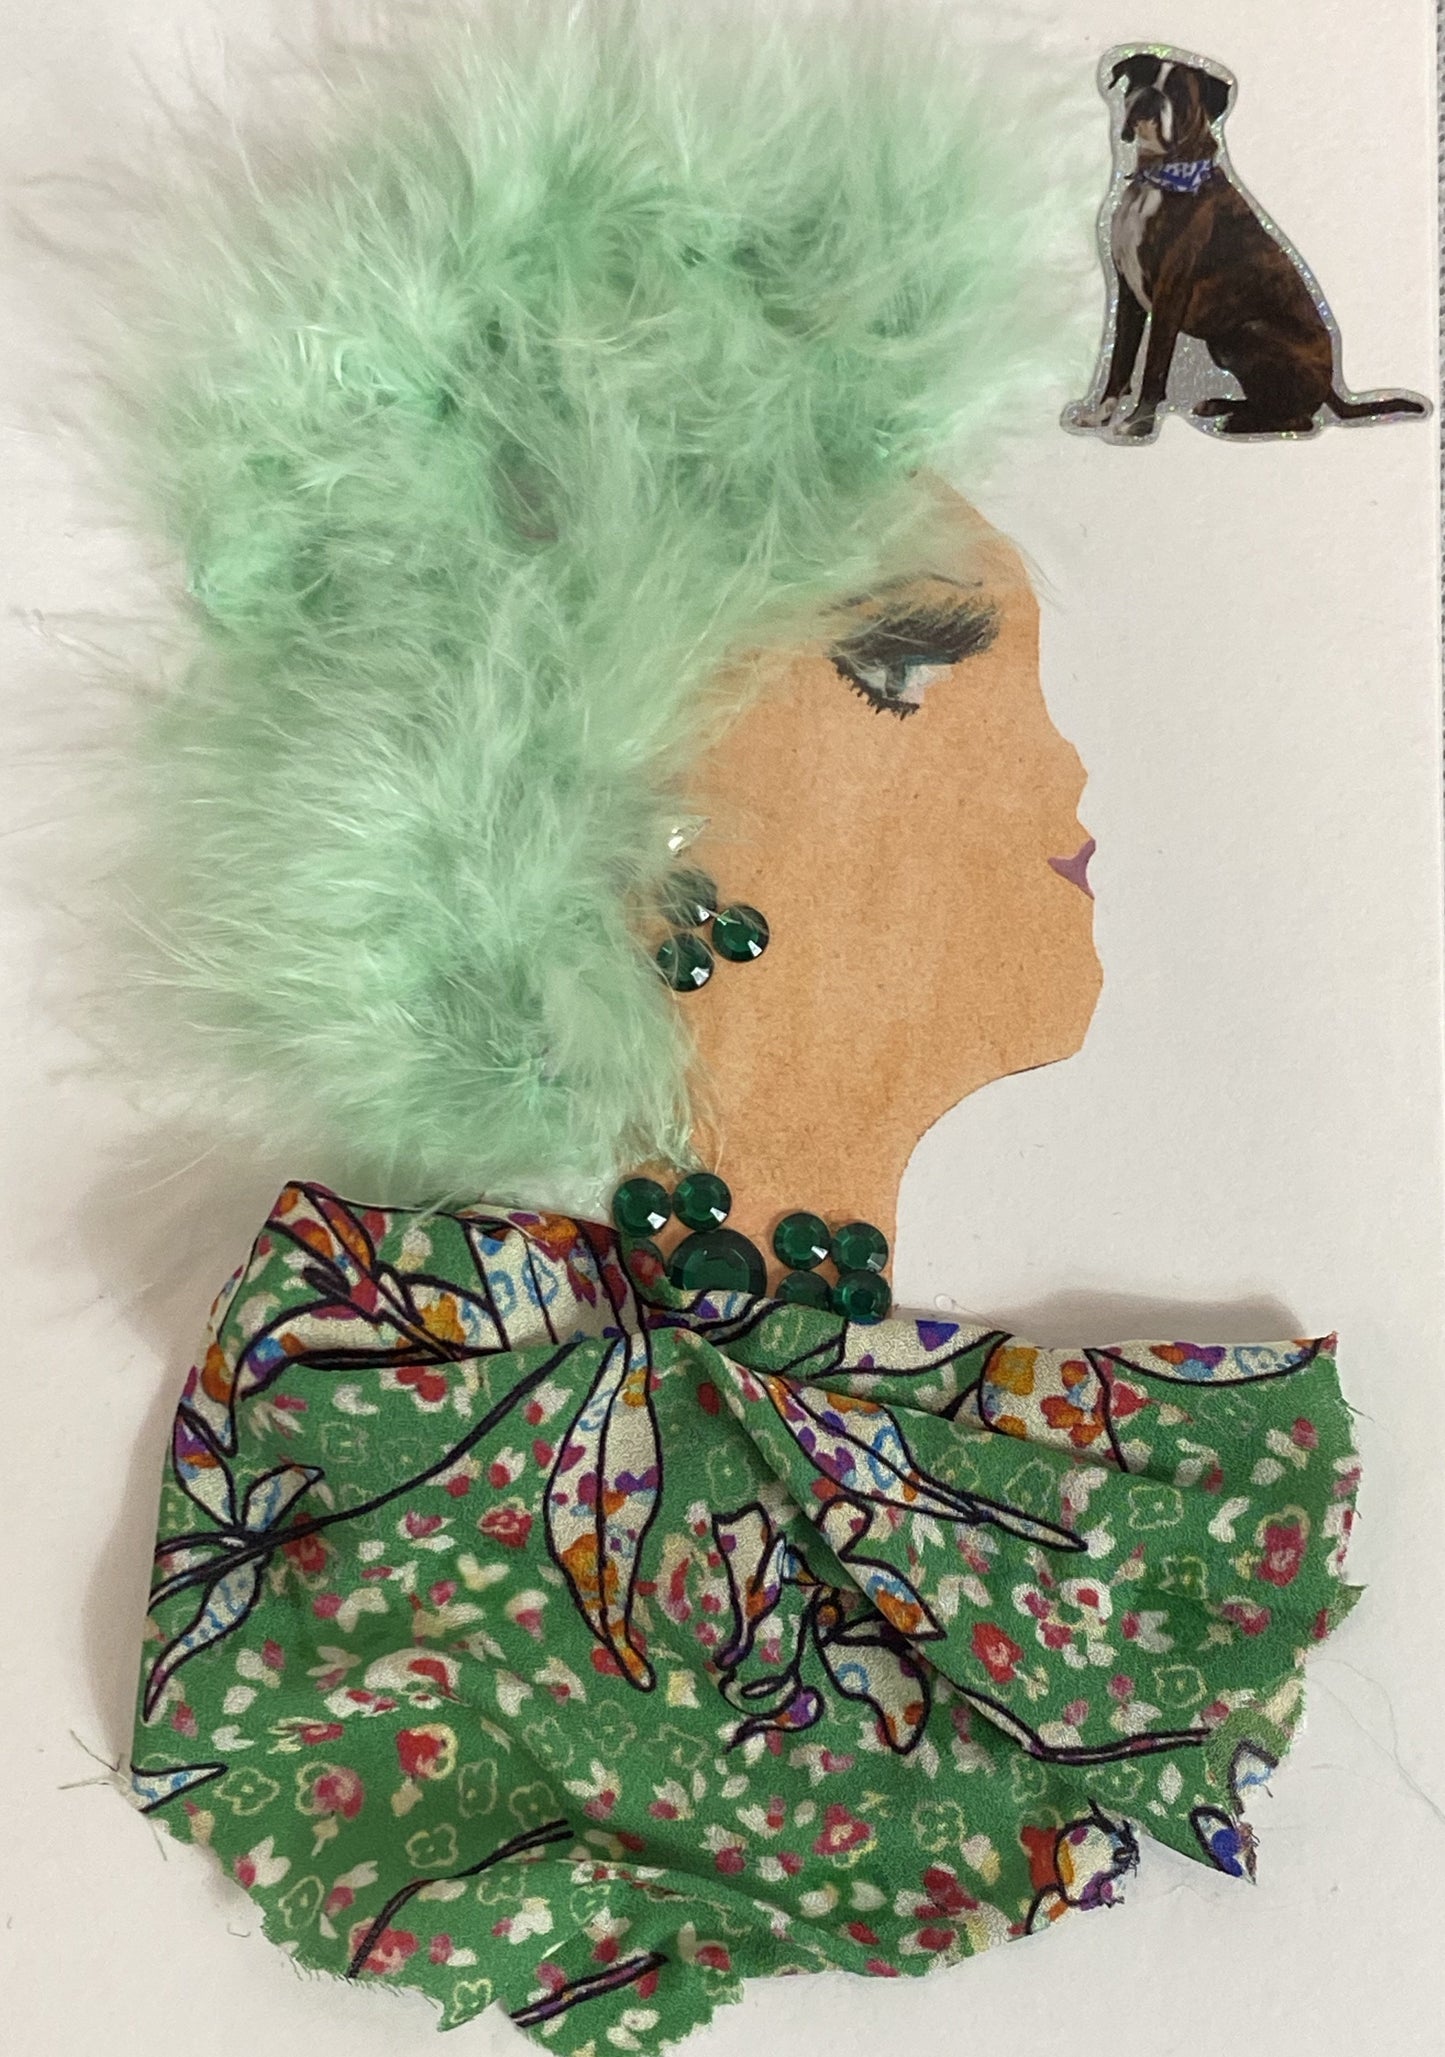 This card depicts a woman given the title Dog Walker. She wears a green floral blouse with small colourful patterns on it, a green gem necklace, and has furry mint green hair. In the top right corner there is a sticker of a dog. 